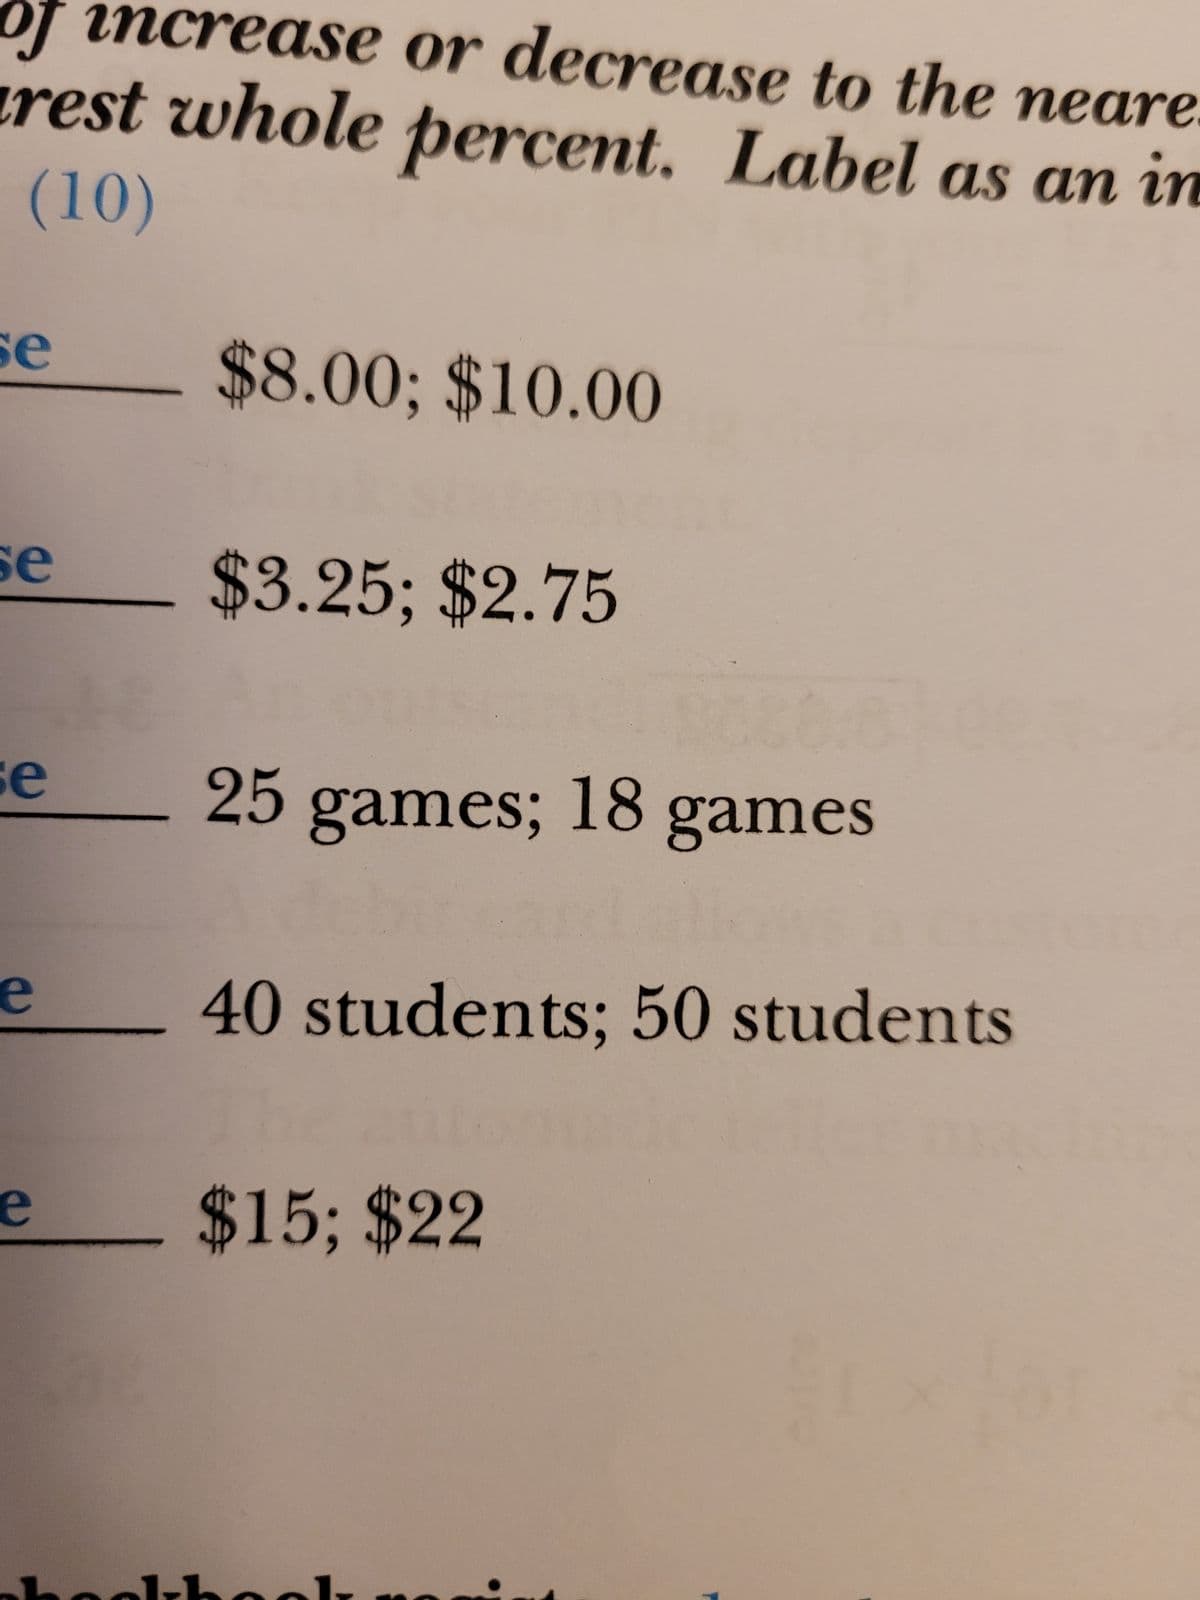 of increase or decrease to the neare.
(10)
rest whole percent. Label as an in
se
se
se
e
e
$8.00; $10.00
$3.25; $2.75
25
games; 18 games
40 students; 50 students
$15; $22